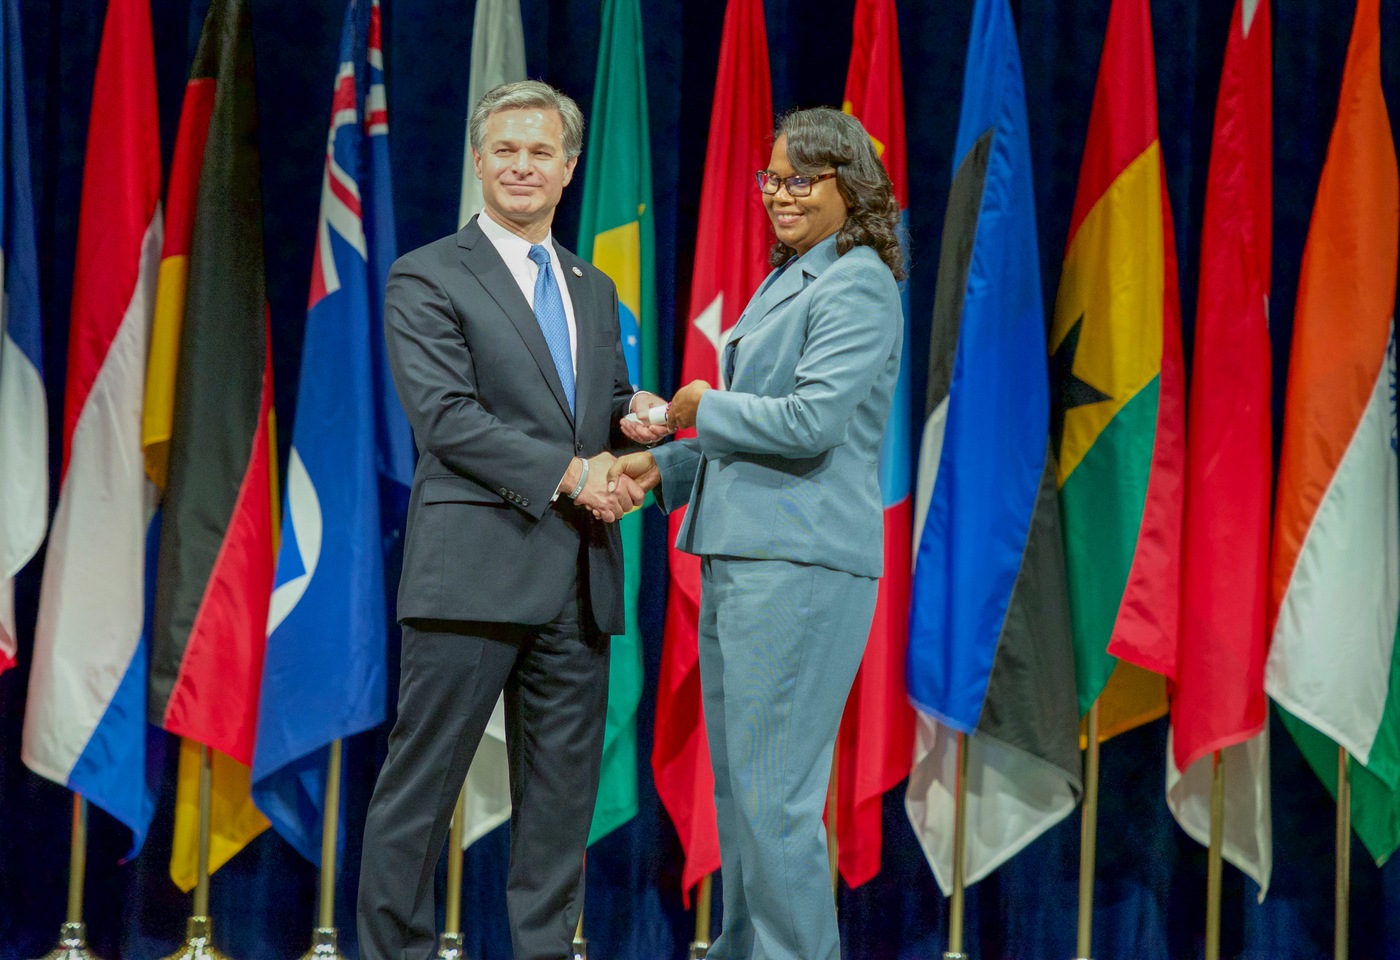 Sherlet Ramclam, an inspector for the Belize Police Department, with FBI Director Christopher Wray at the National Academy graduation on June 7, 2019.